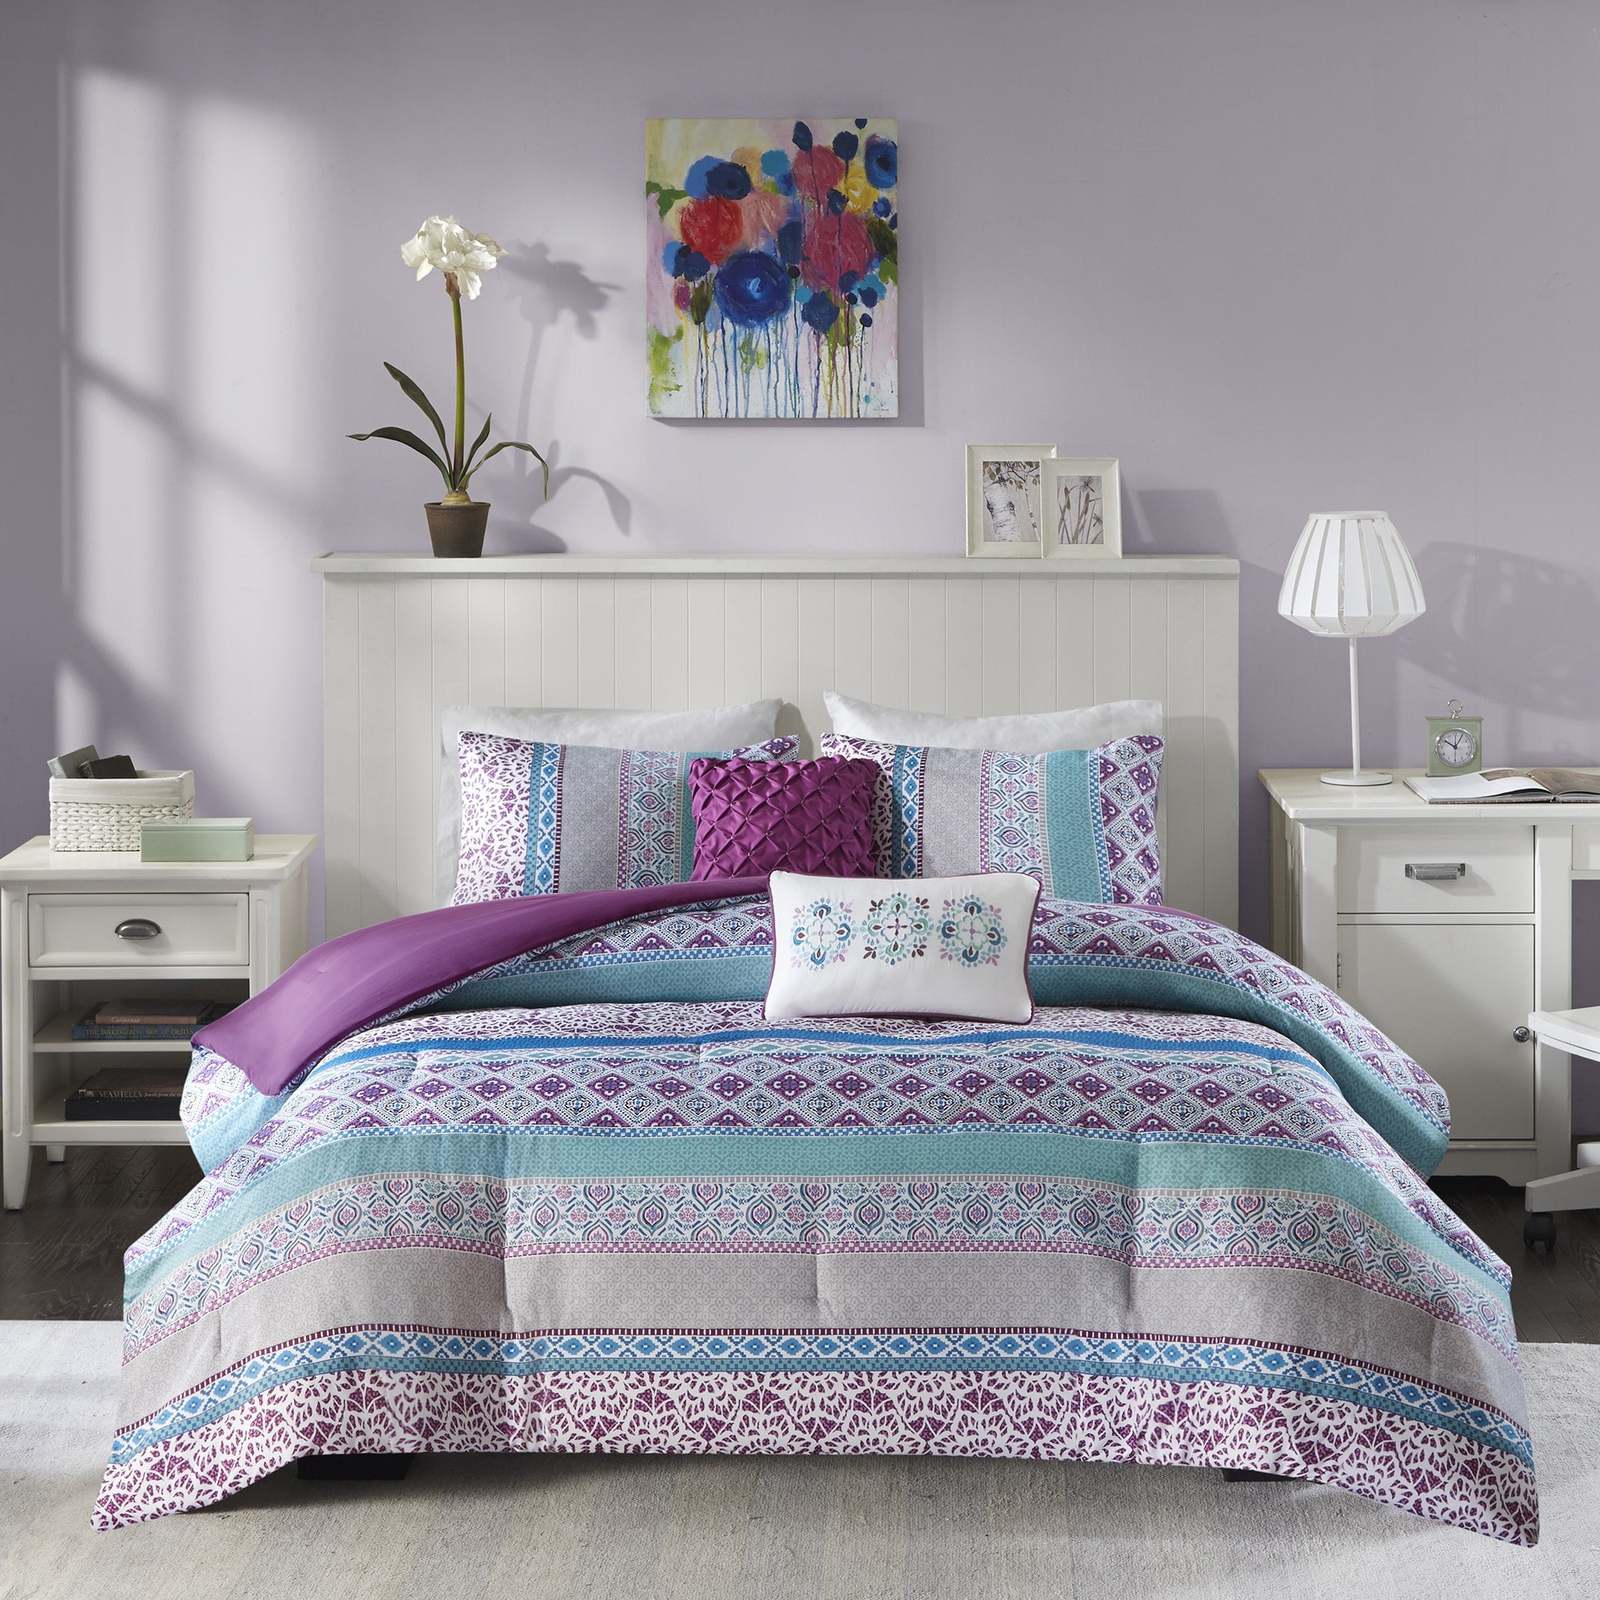 Light Purple Walls With a Patterned Comforter